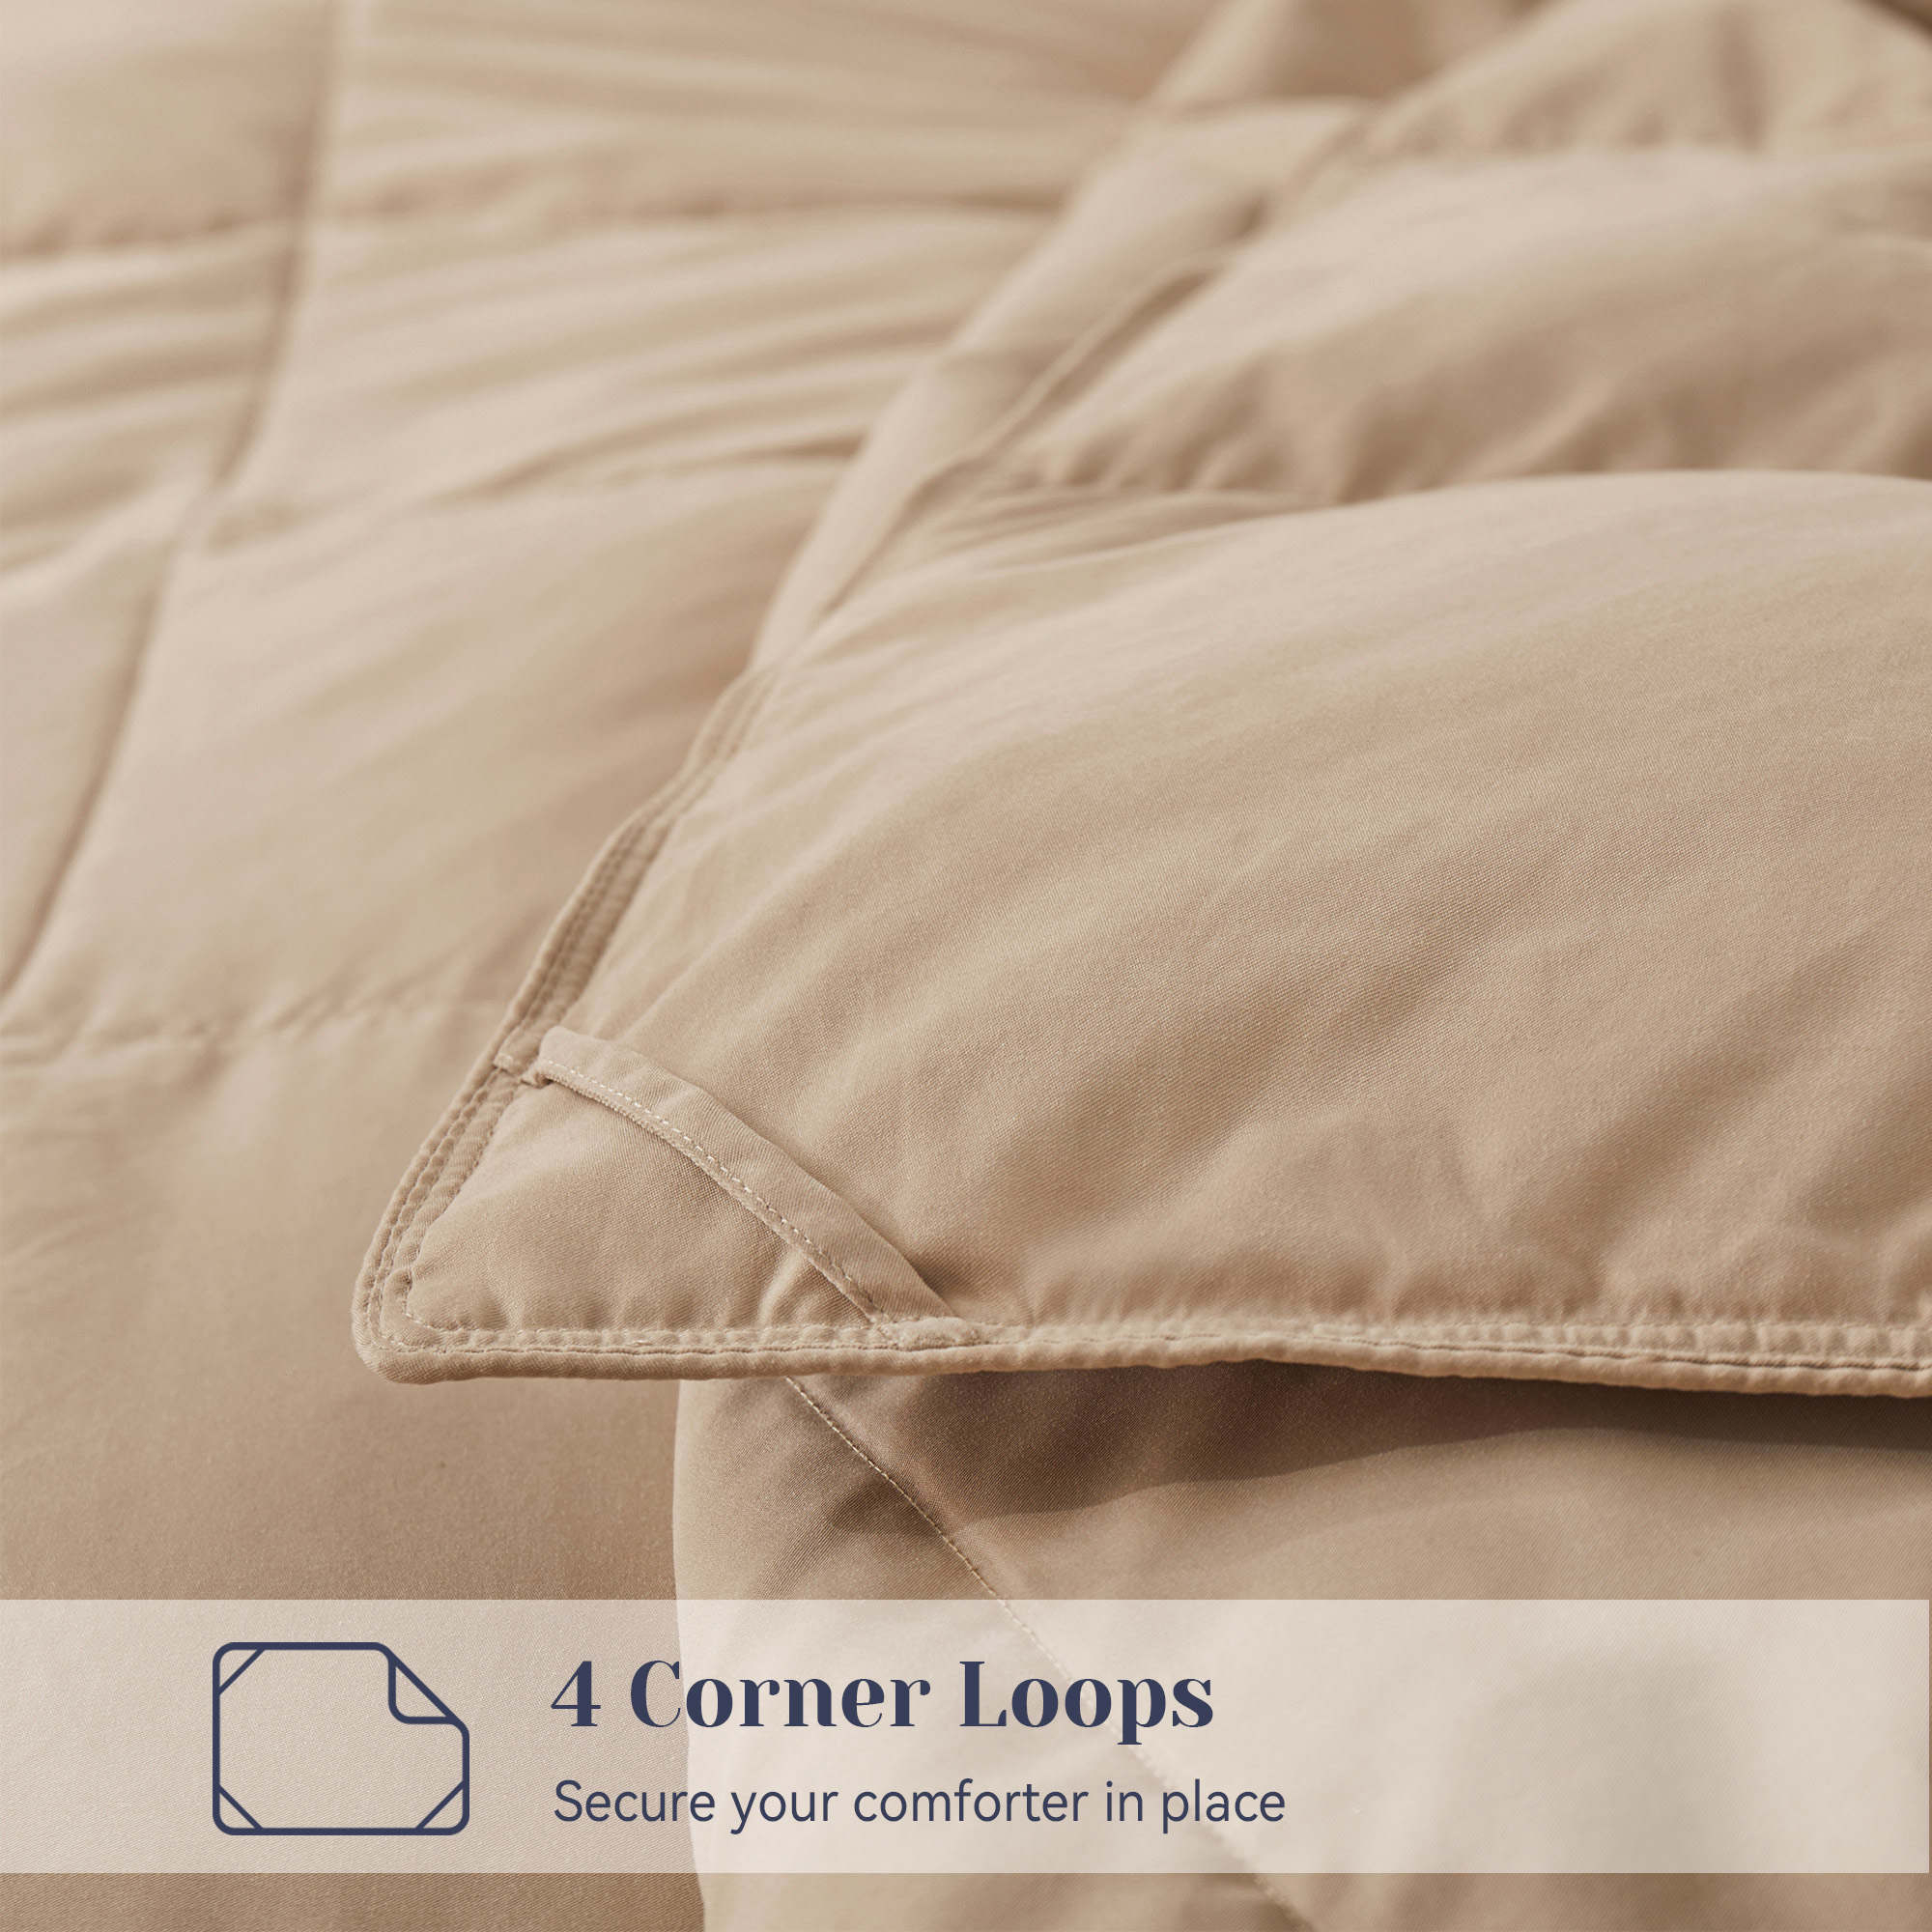 Lightweight Goose Down Feather Fiber Comforter, Soft And Fluffy Comforter For Restful Sleep - Twin